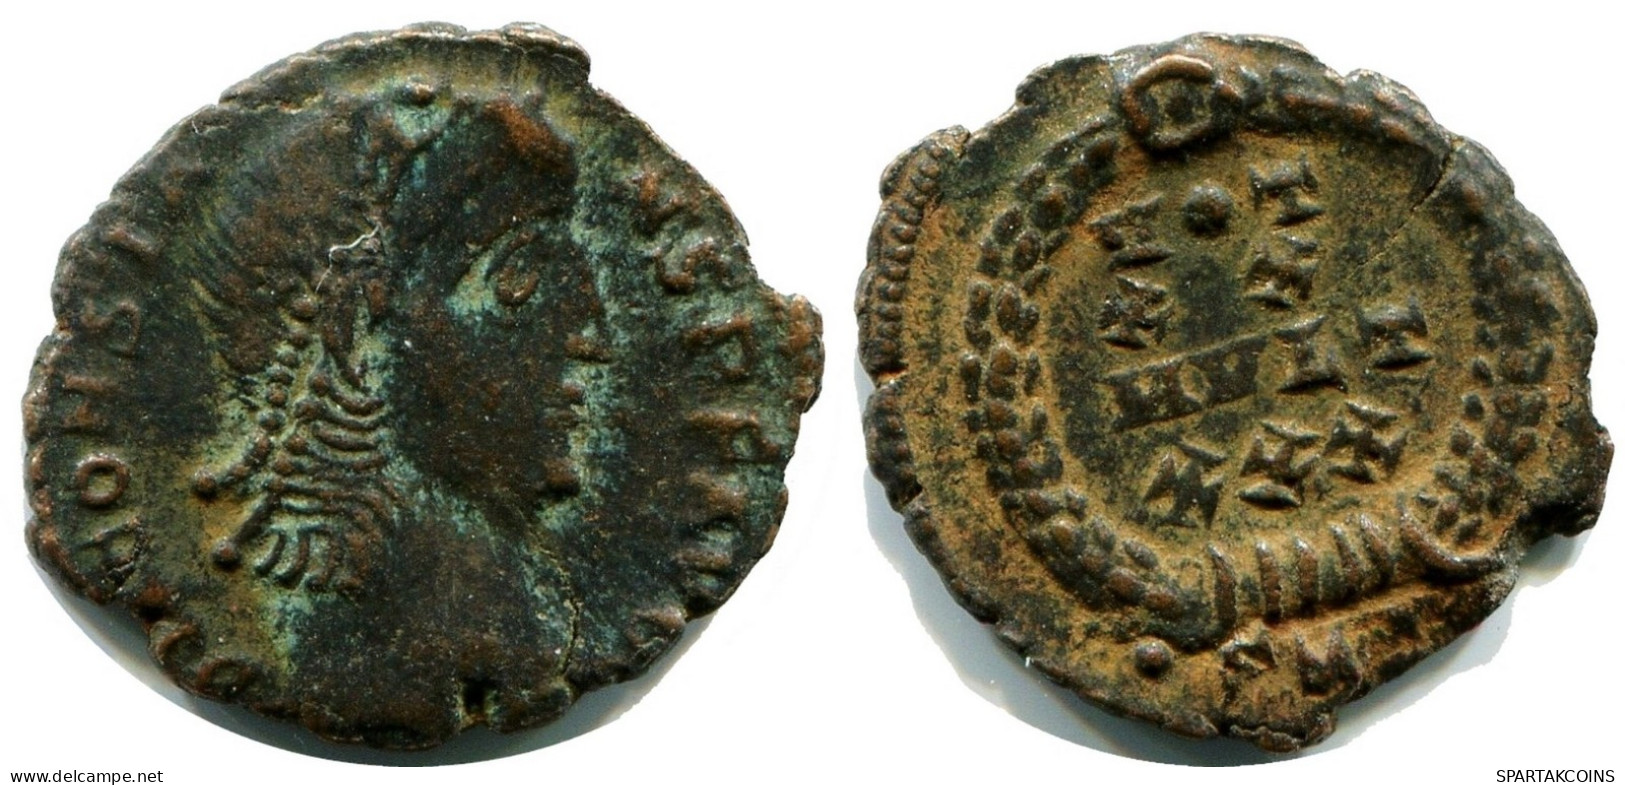 CONSTANS MINTED IN NICOMEDIA FROM THE ROYAL ONTARIO MUSEUM #ANC11751.14.F.A - Der Christlischen Kaiser (307 / 363)